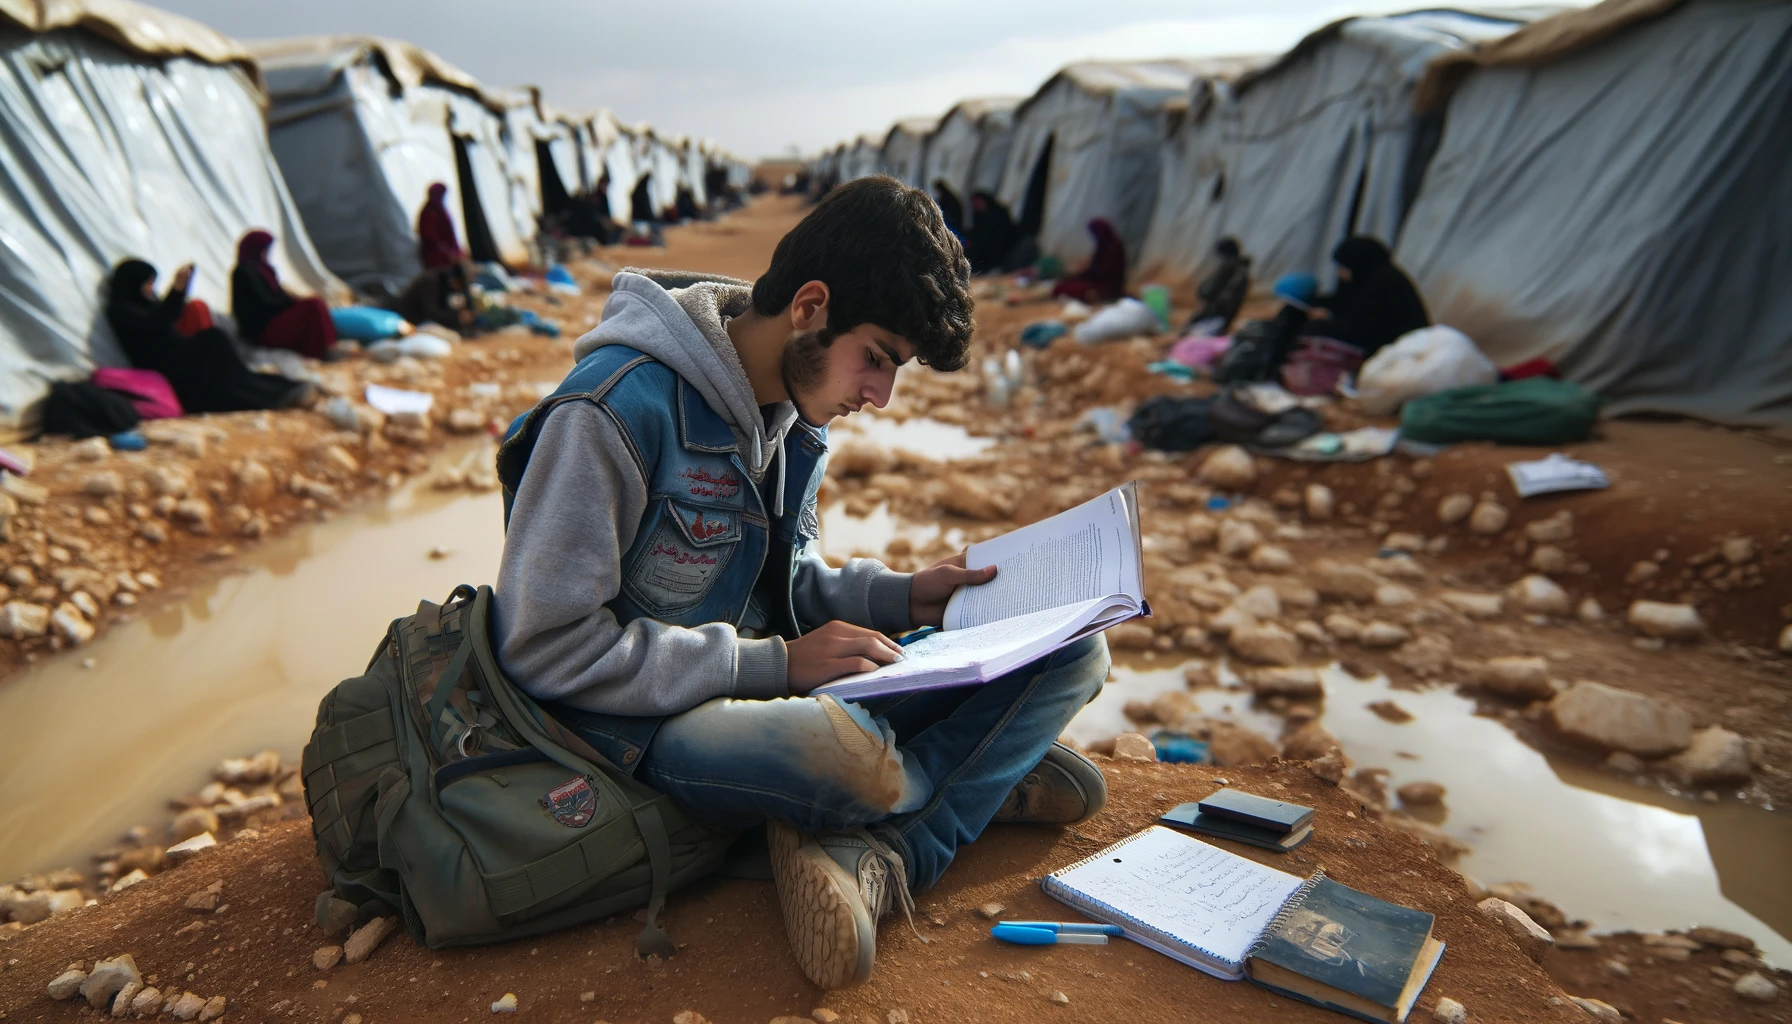 In this article, we discuss the importance of free online education for students affected by wars, displacement, and orphanhood. .